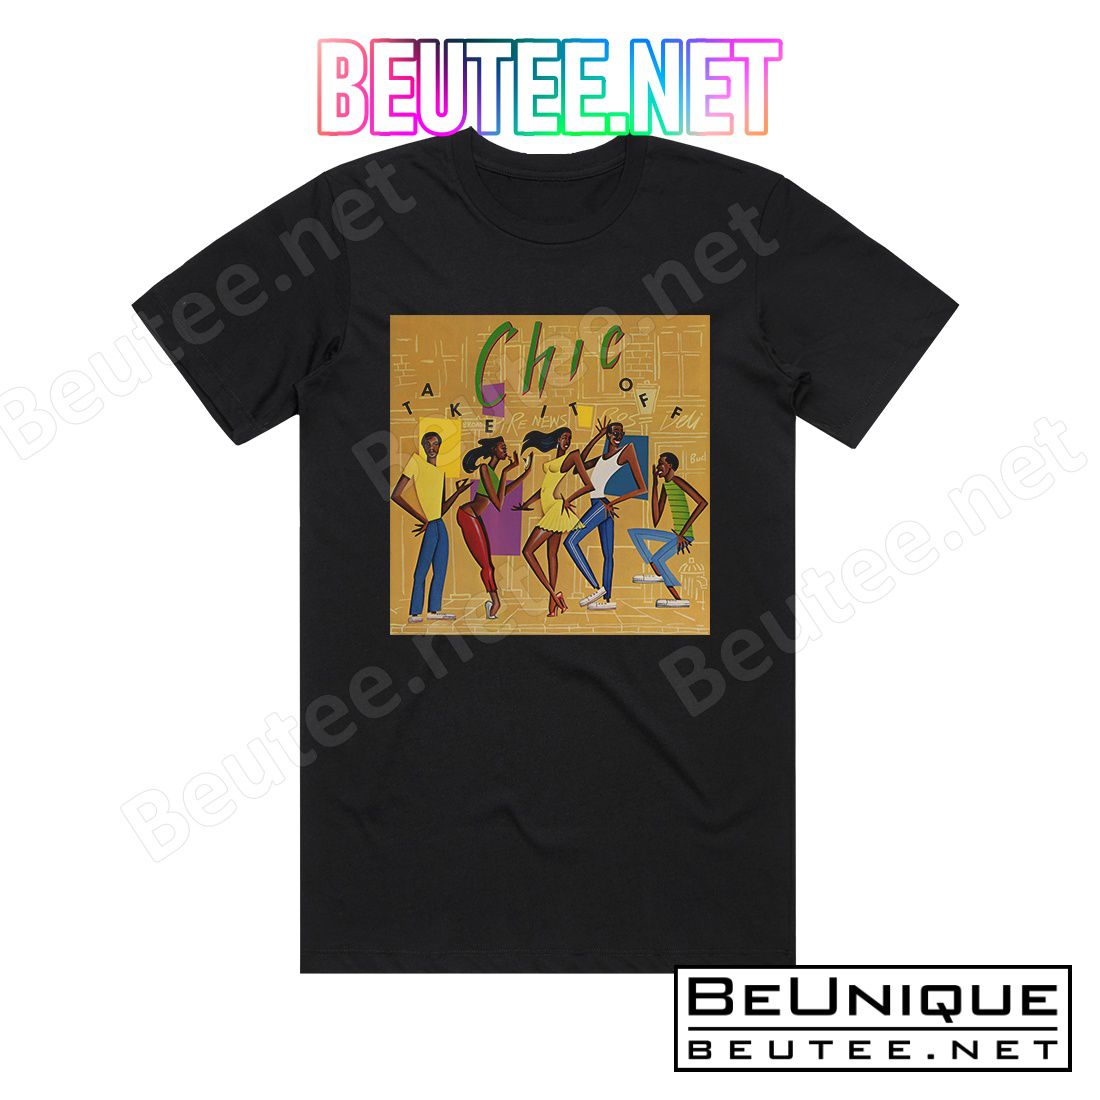 Chic Take It Off Album Cover T-Shirt